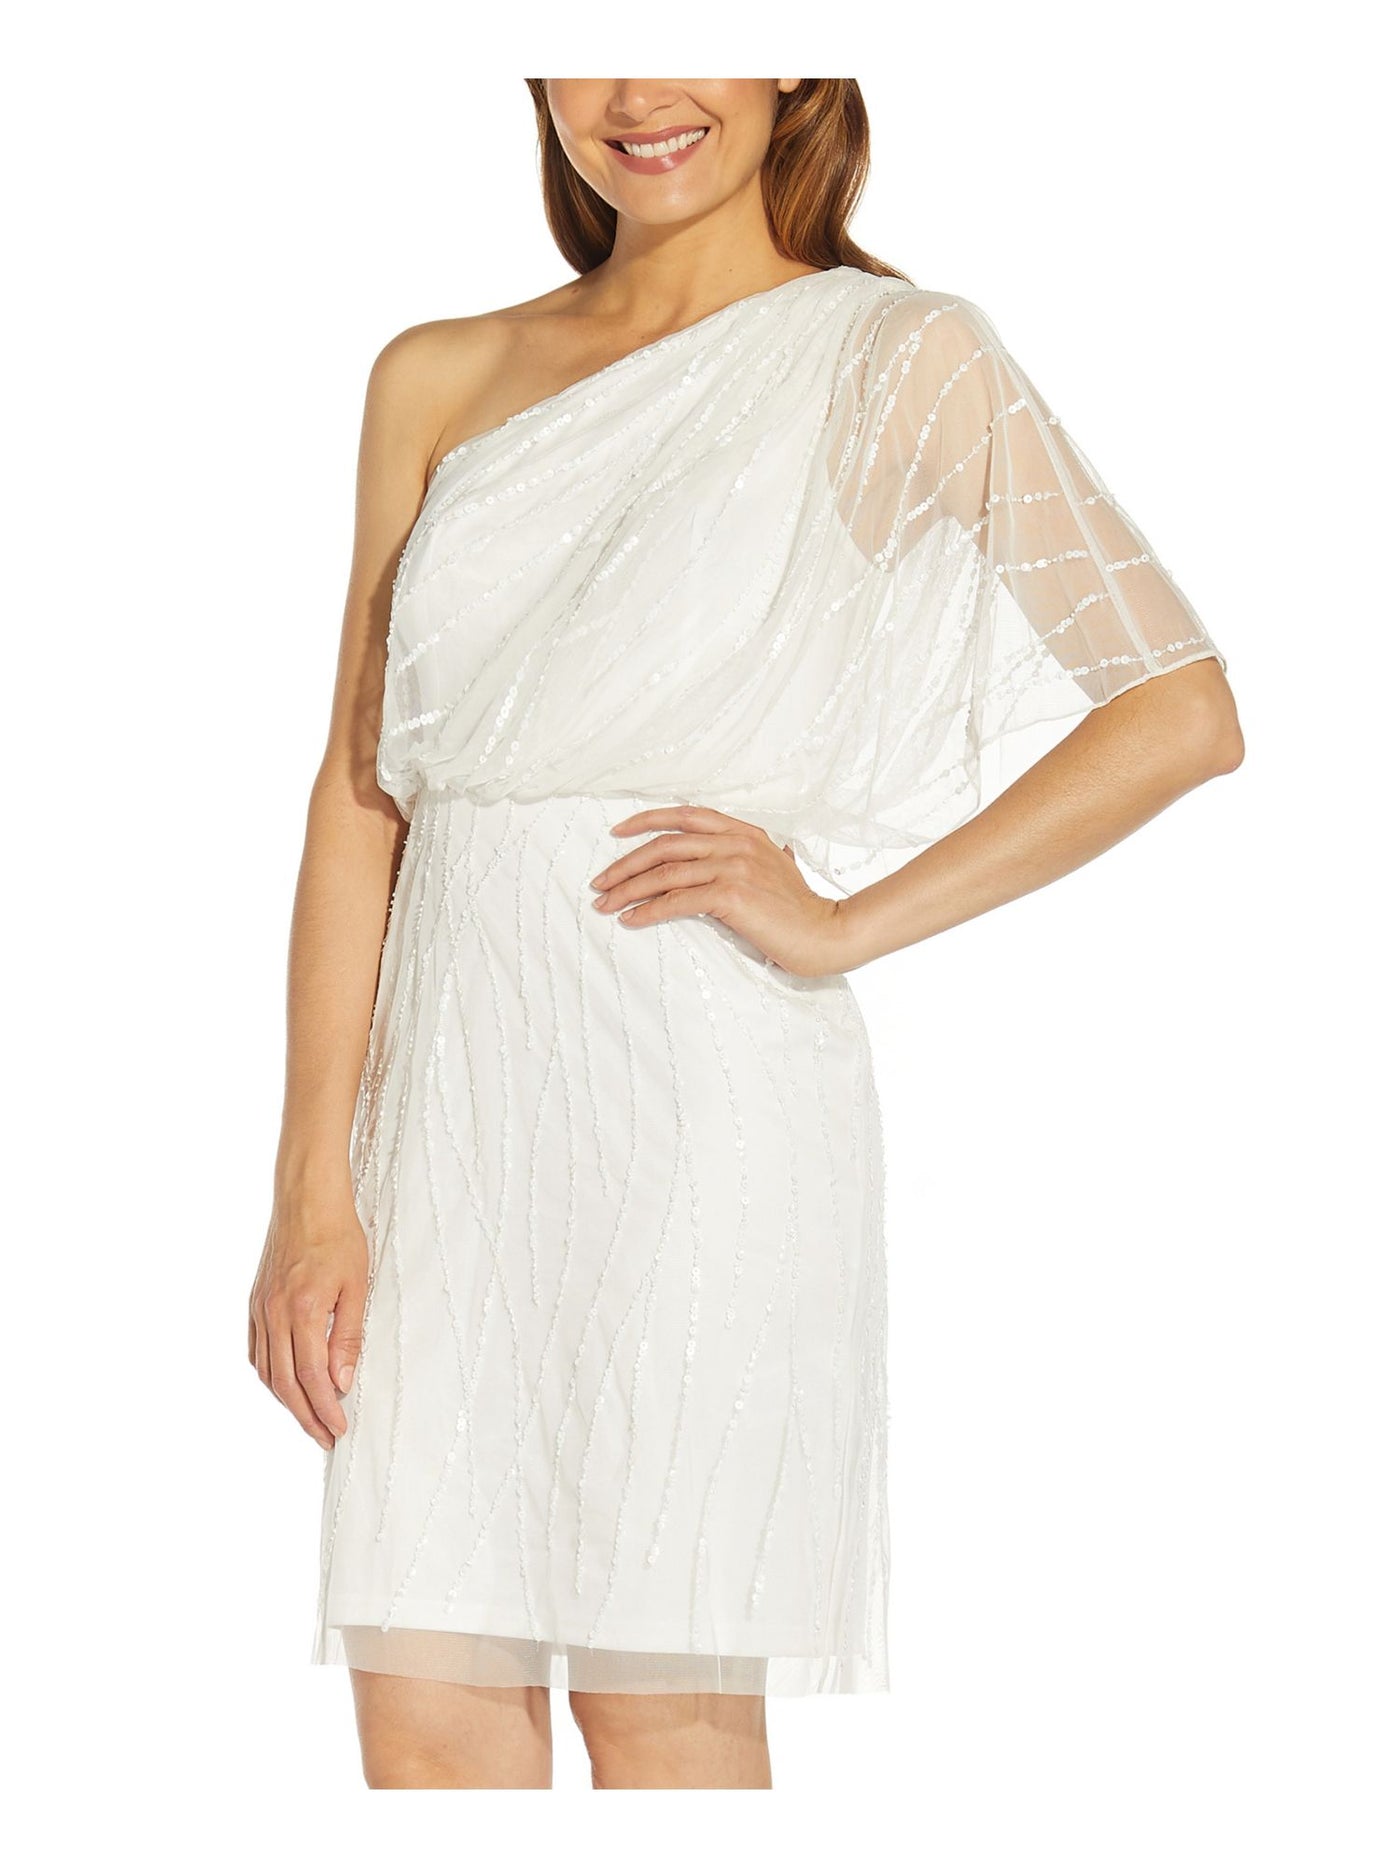 ADRIANNA PAPELL Womens Sequined Textured Sheer Lined Short Sleeve Asymmetrical Neckline Above The Knee Cocktail Blouson Dress